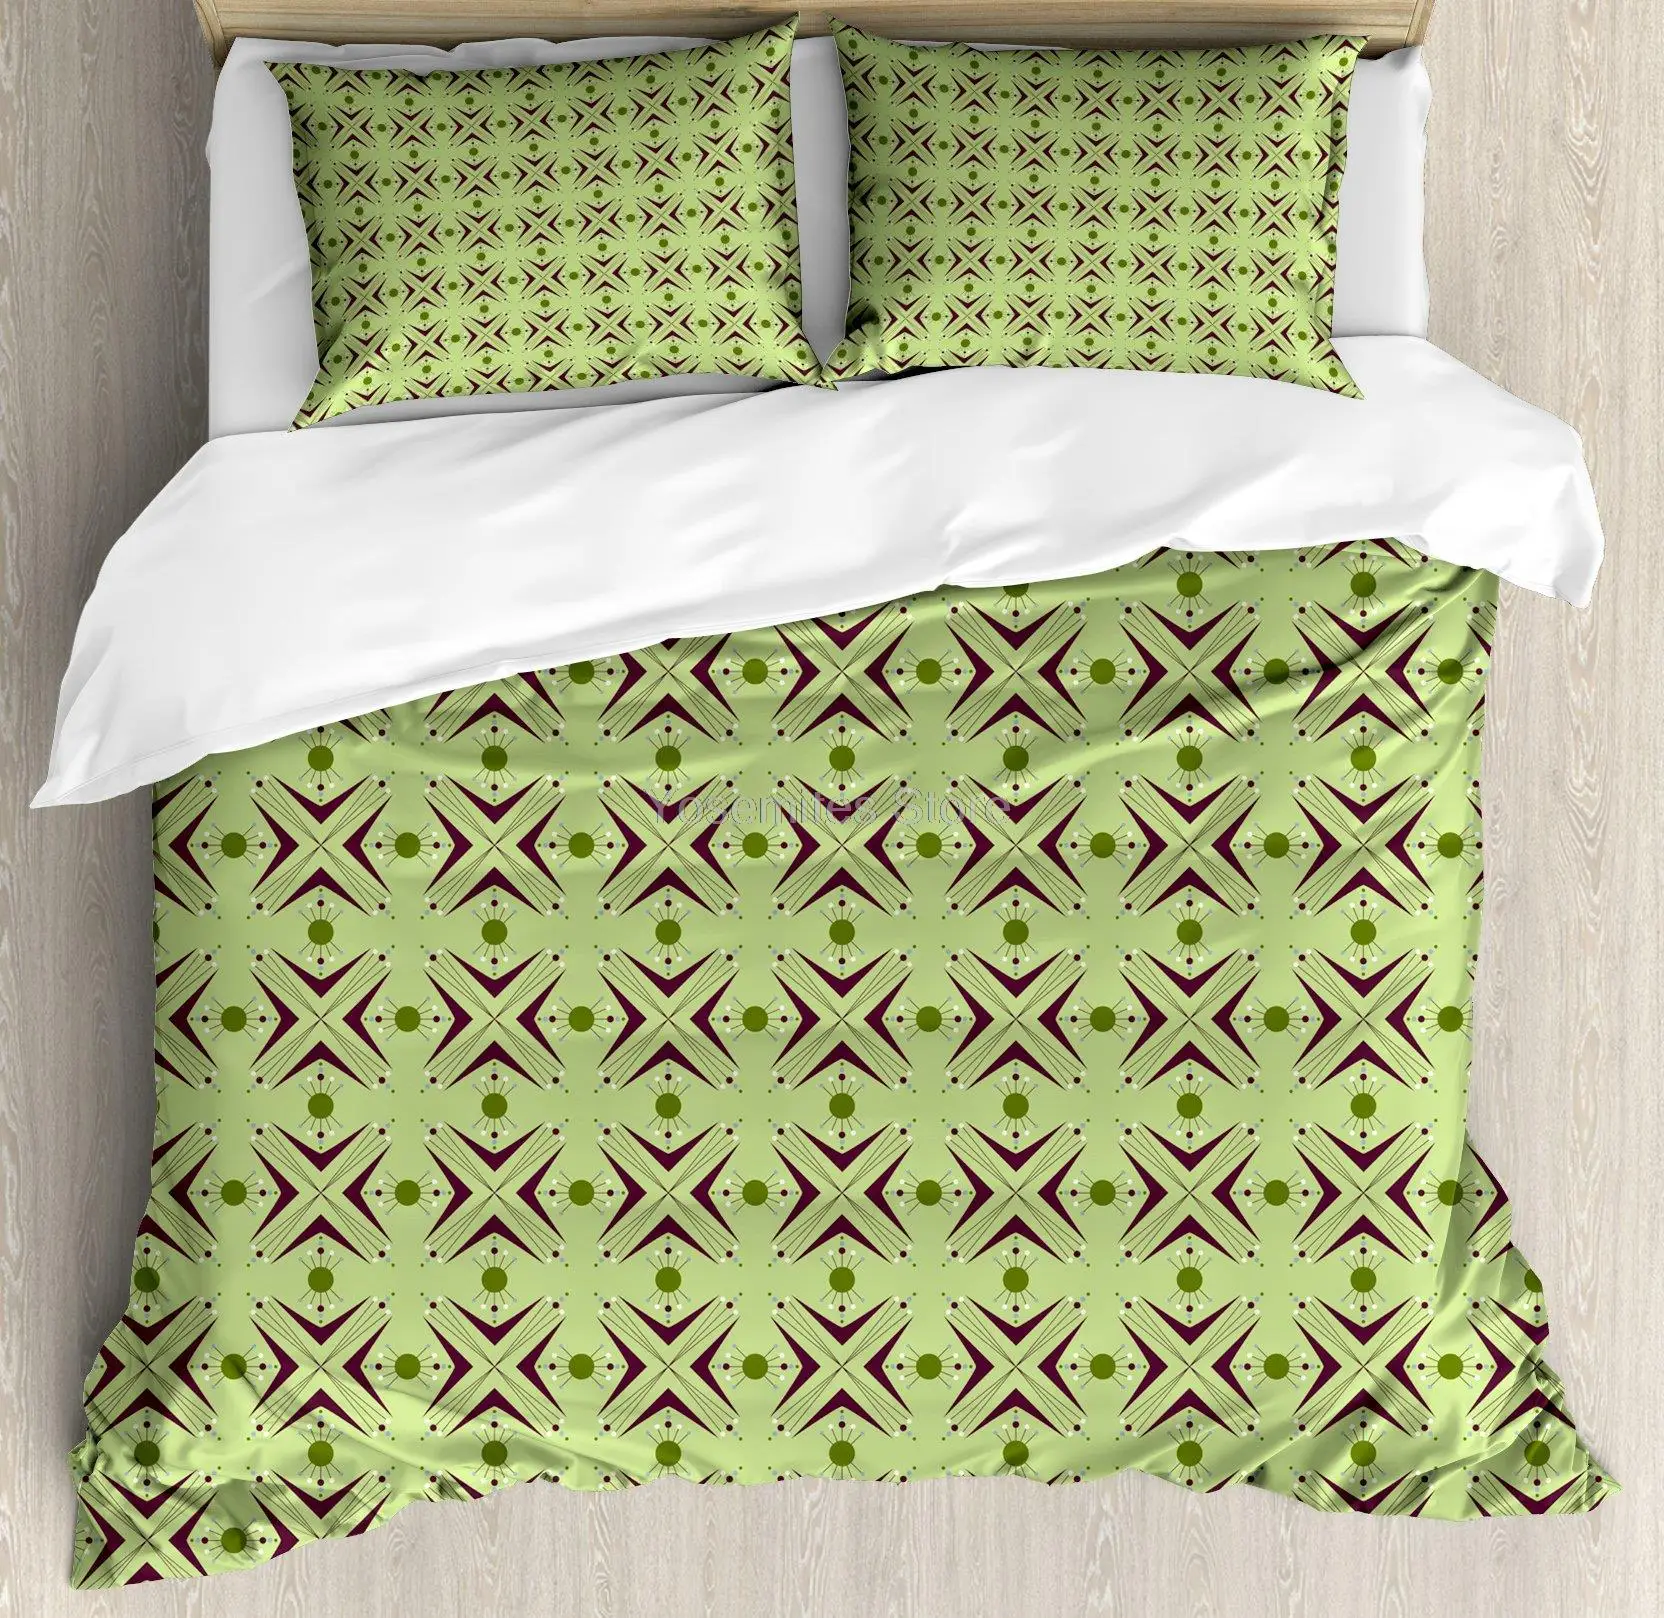 

Mid Century Duvet Cover Set, Atomic Form with Boomerang Details Dots and Crossed Lines, Decorative 3 Piece Bedding Set with 2 P